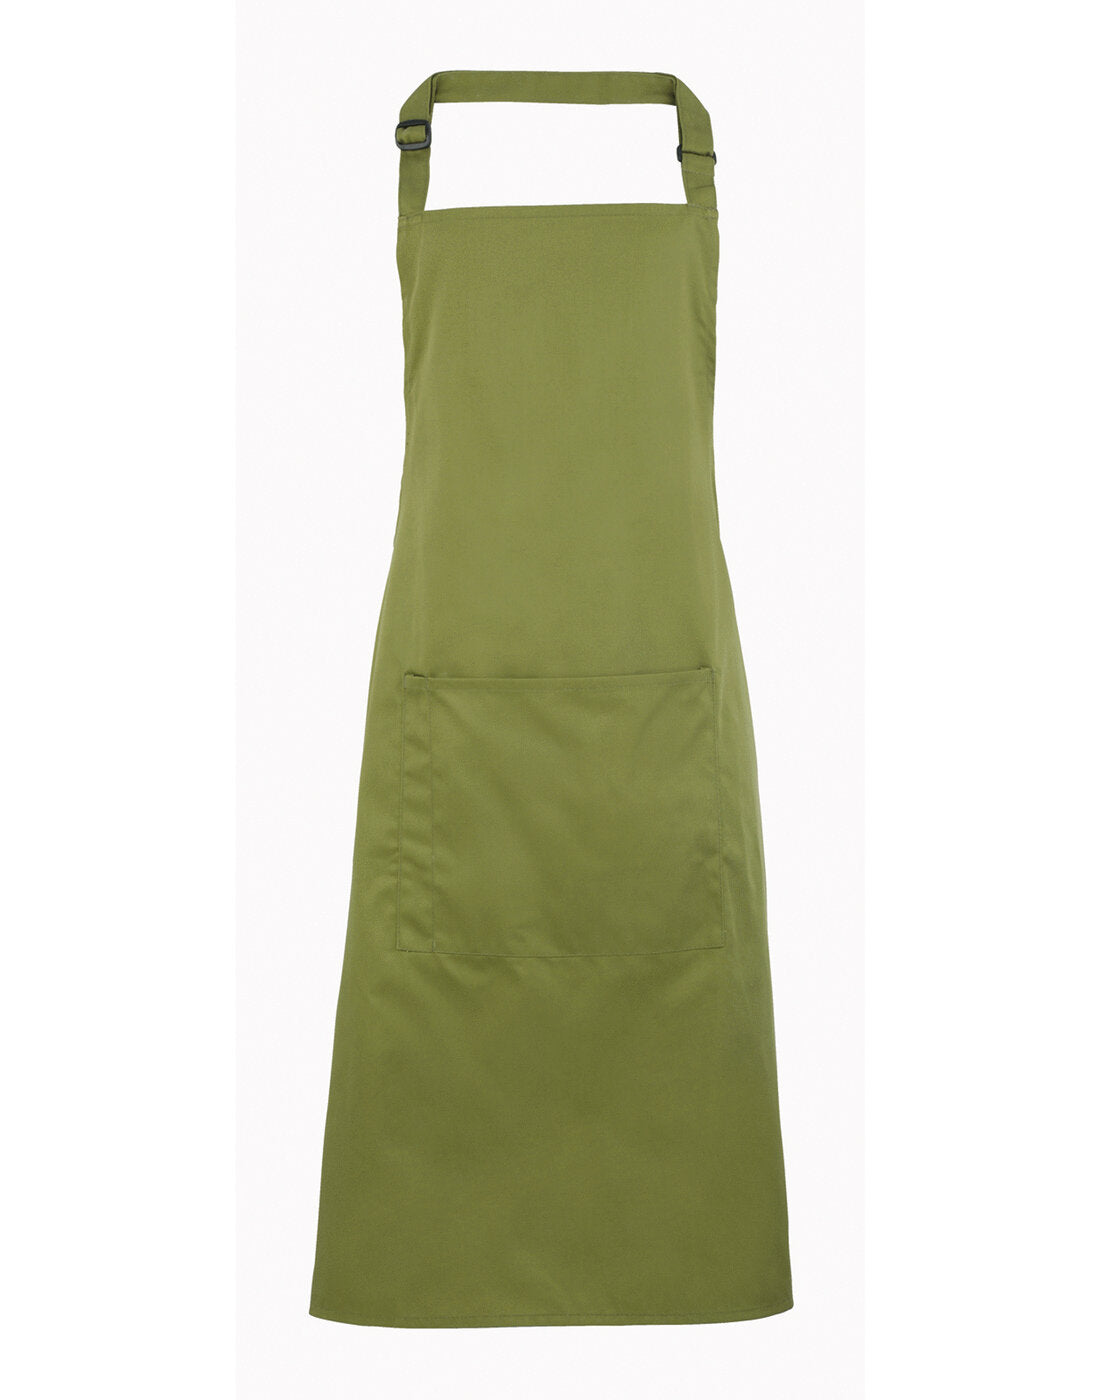 Personalised Premier Colours Collection Hospitality Bib Apron with Pockets